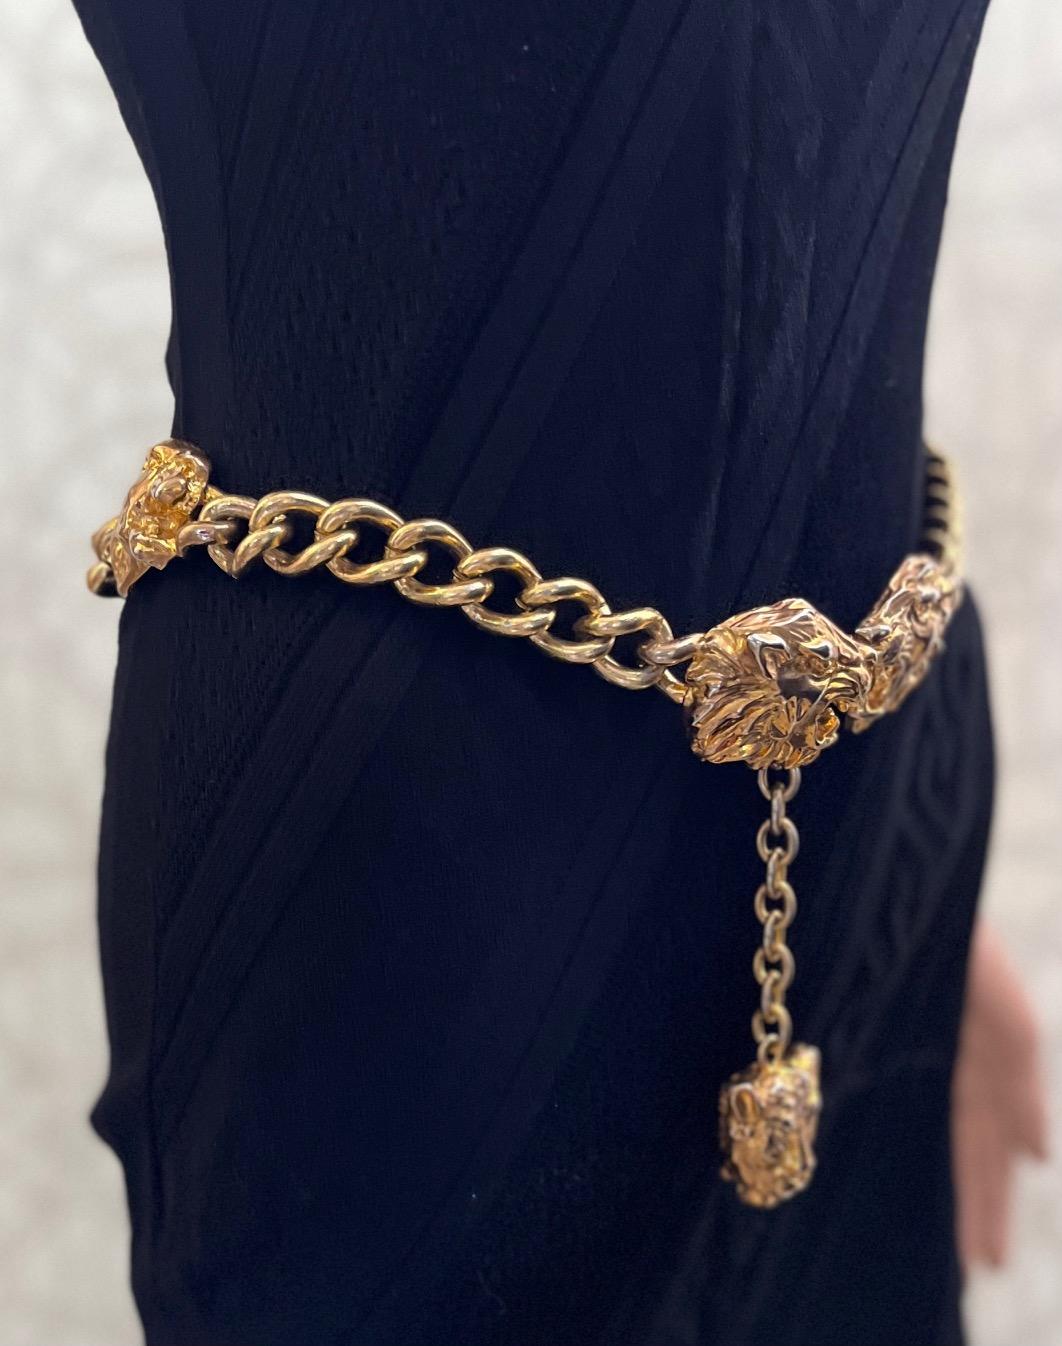 F/W 1992 GIANNI VERSACE GOLD TONE METAL JAGUAR MOTIF CHAIN Belt  In Excellent Condition For Sale In Montgomery, TX